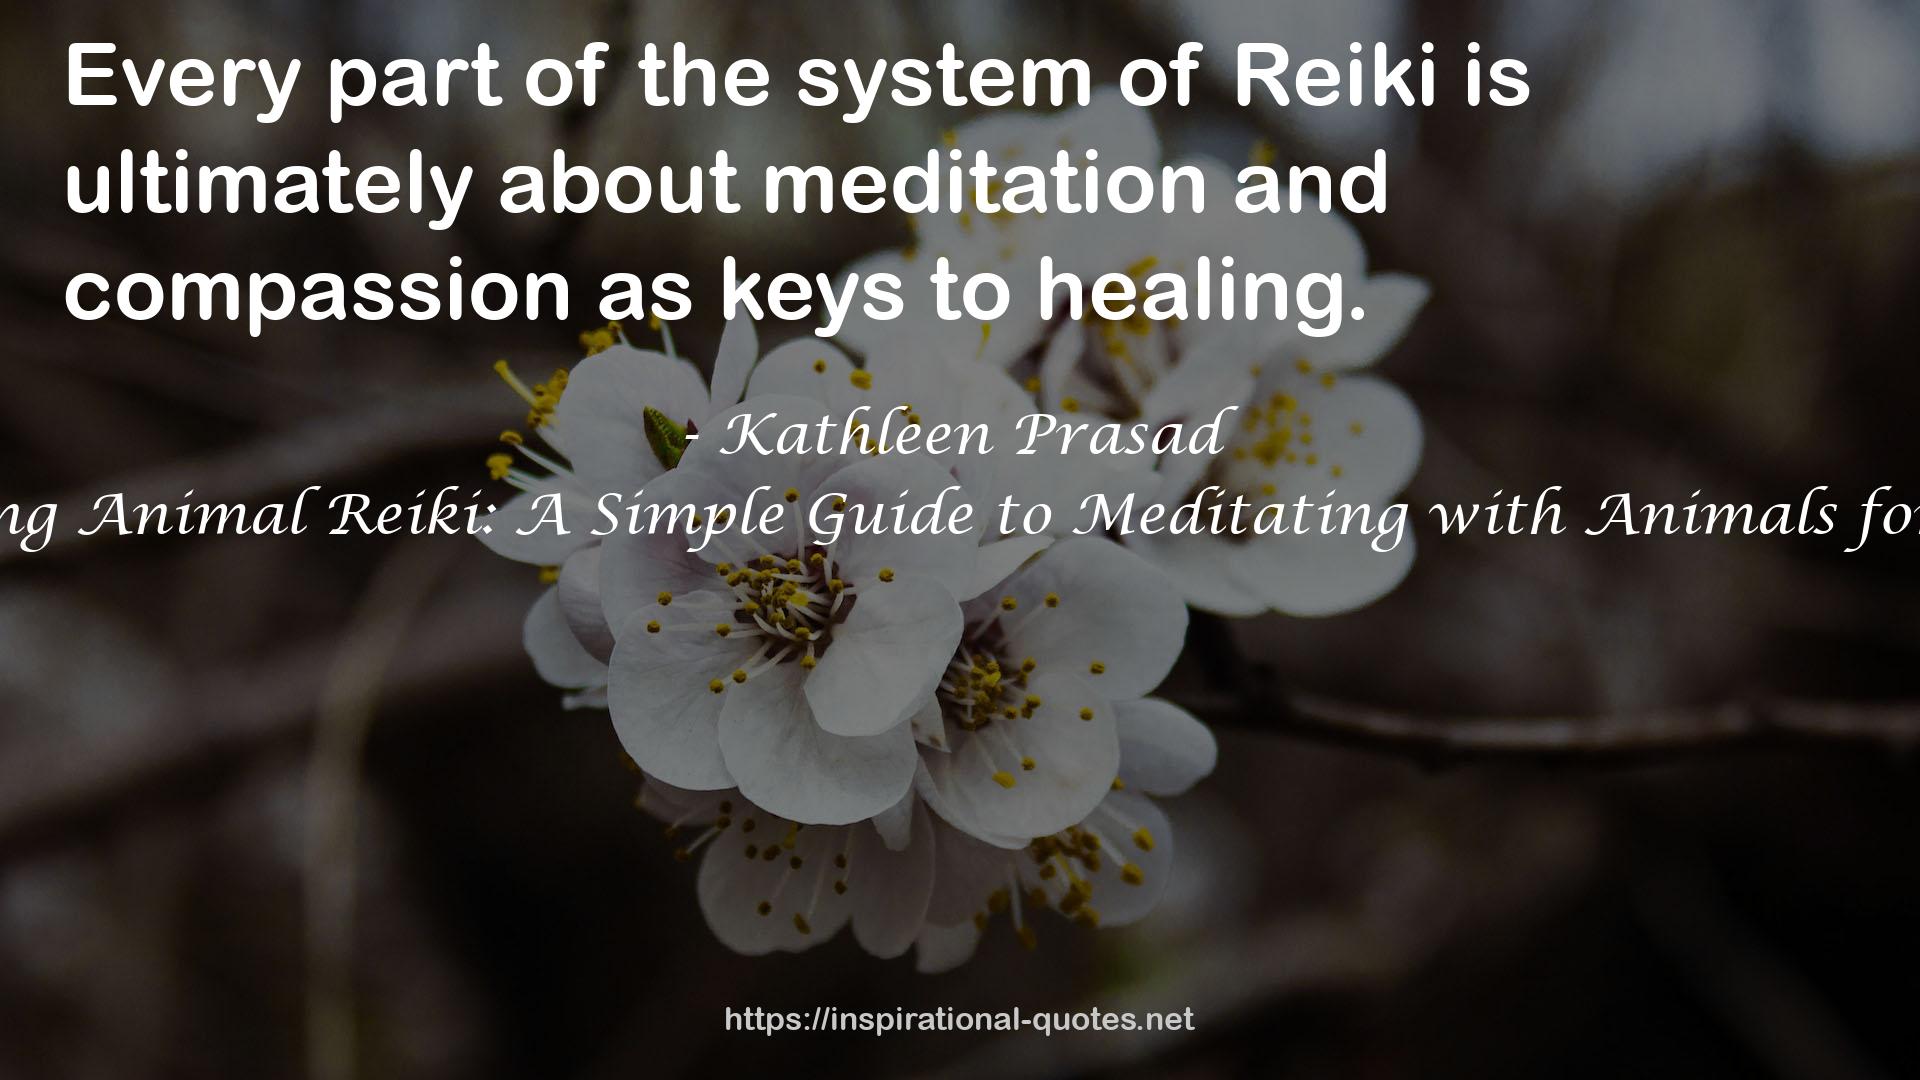 Everything Animal Reiki: A Simple Guide to Meditating with Animals for Healing QUOTES